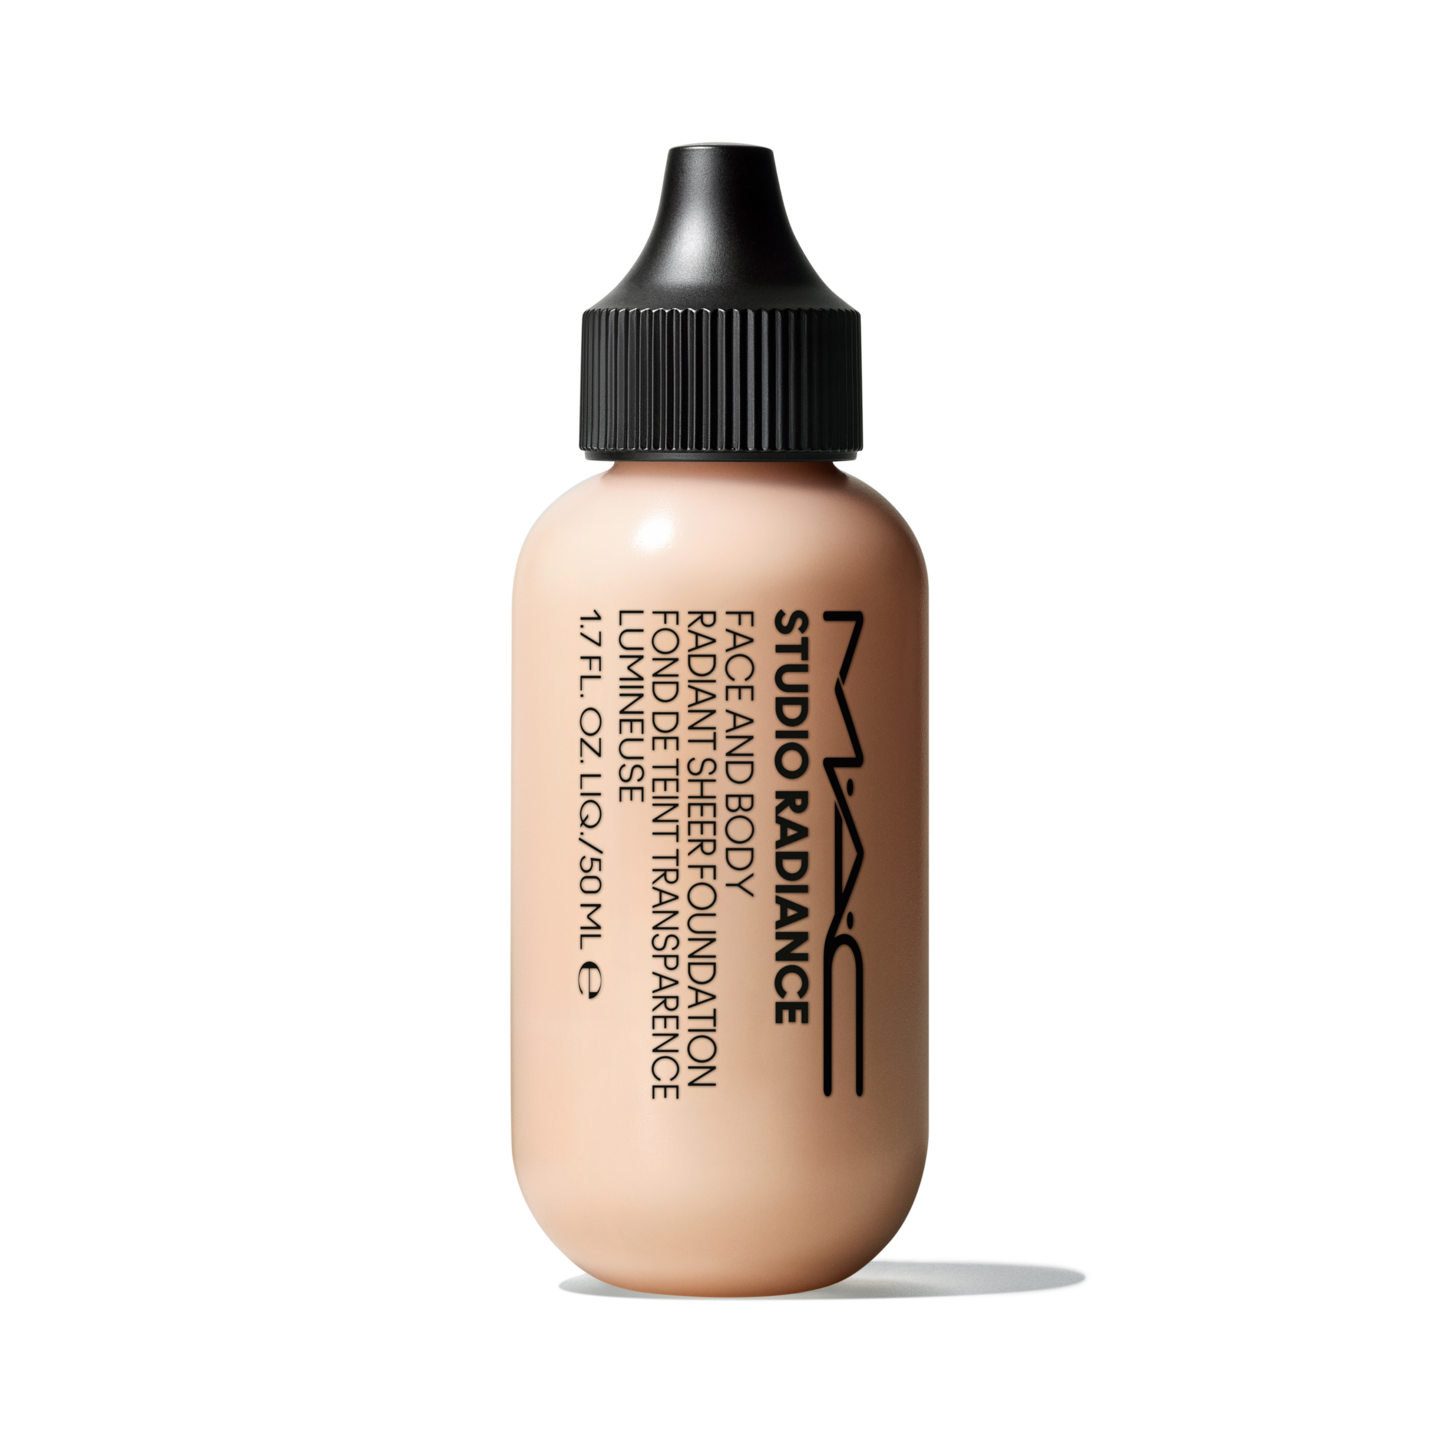 Body Makeup Foundation Flawless Perfect Full Body Coverage Concealer  Foundation